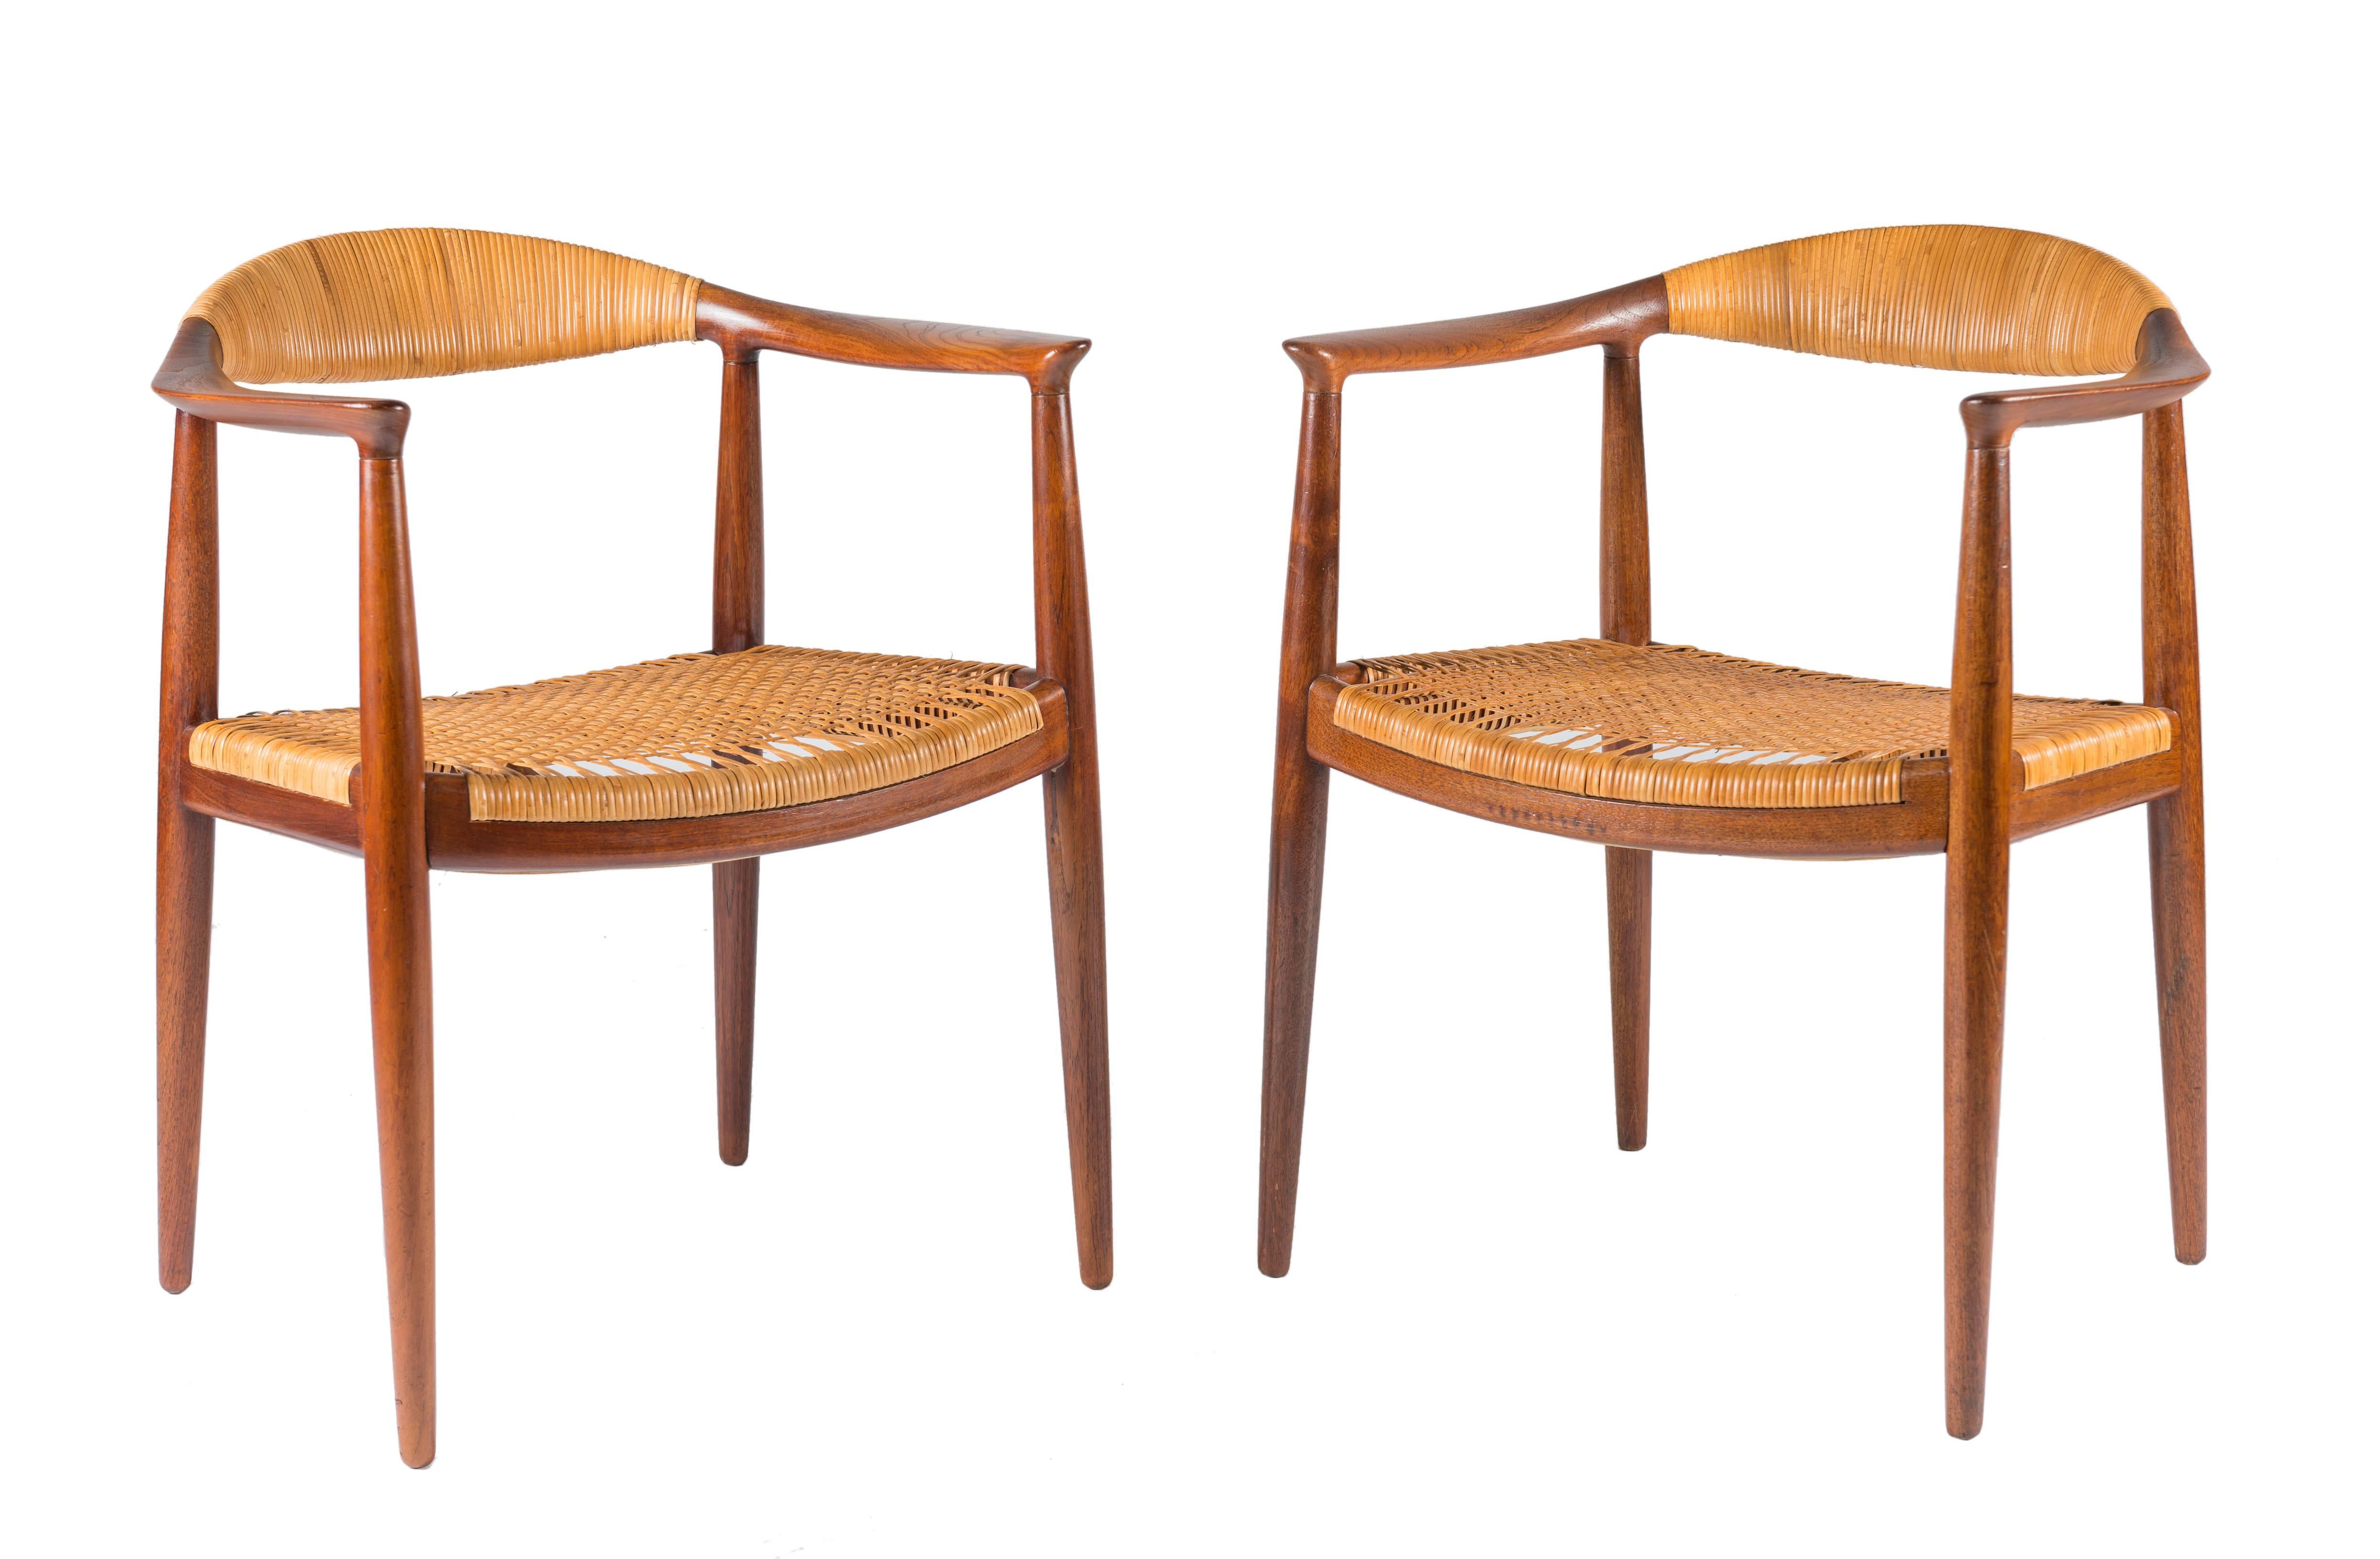 Rare matched set of 12 Wegner "Classic" chairs manufactured by Johannes Hansen. All signed.